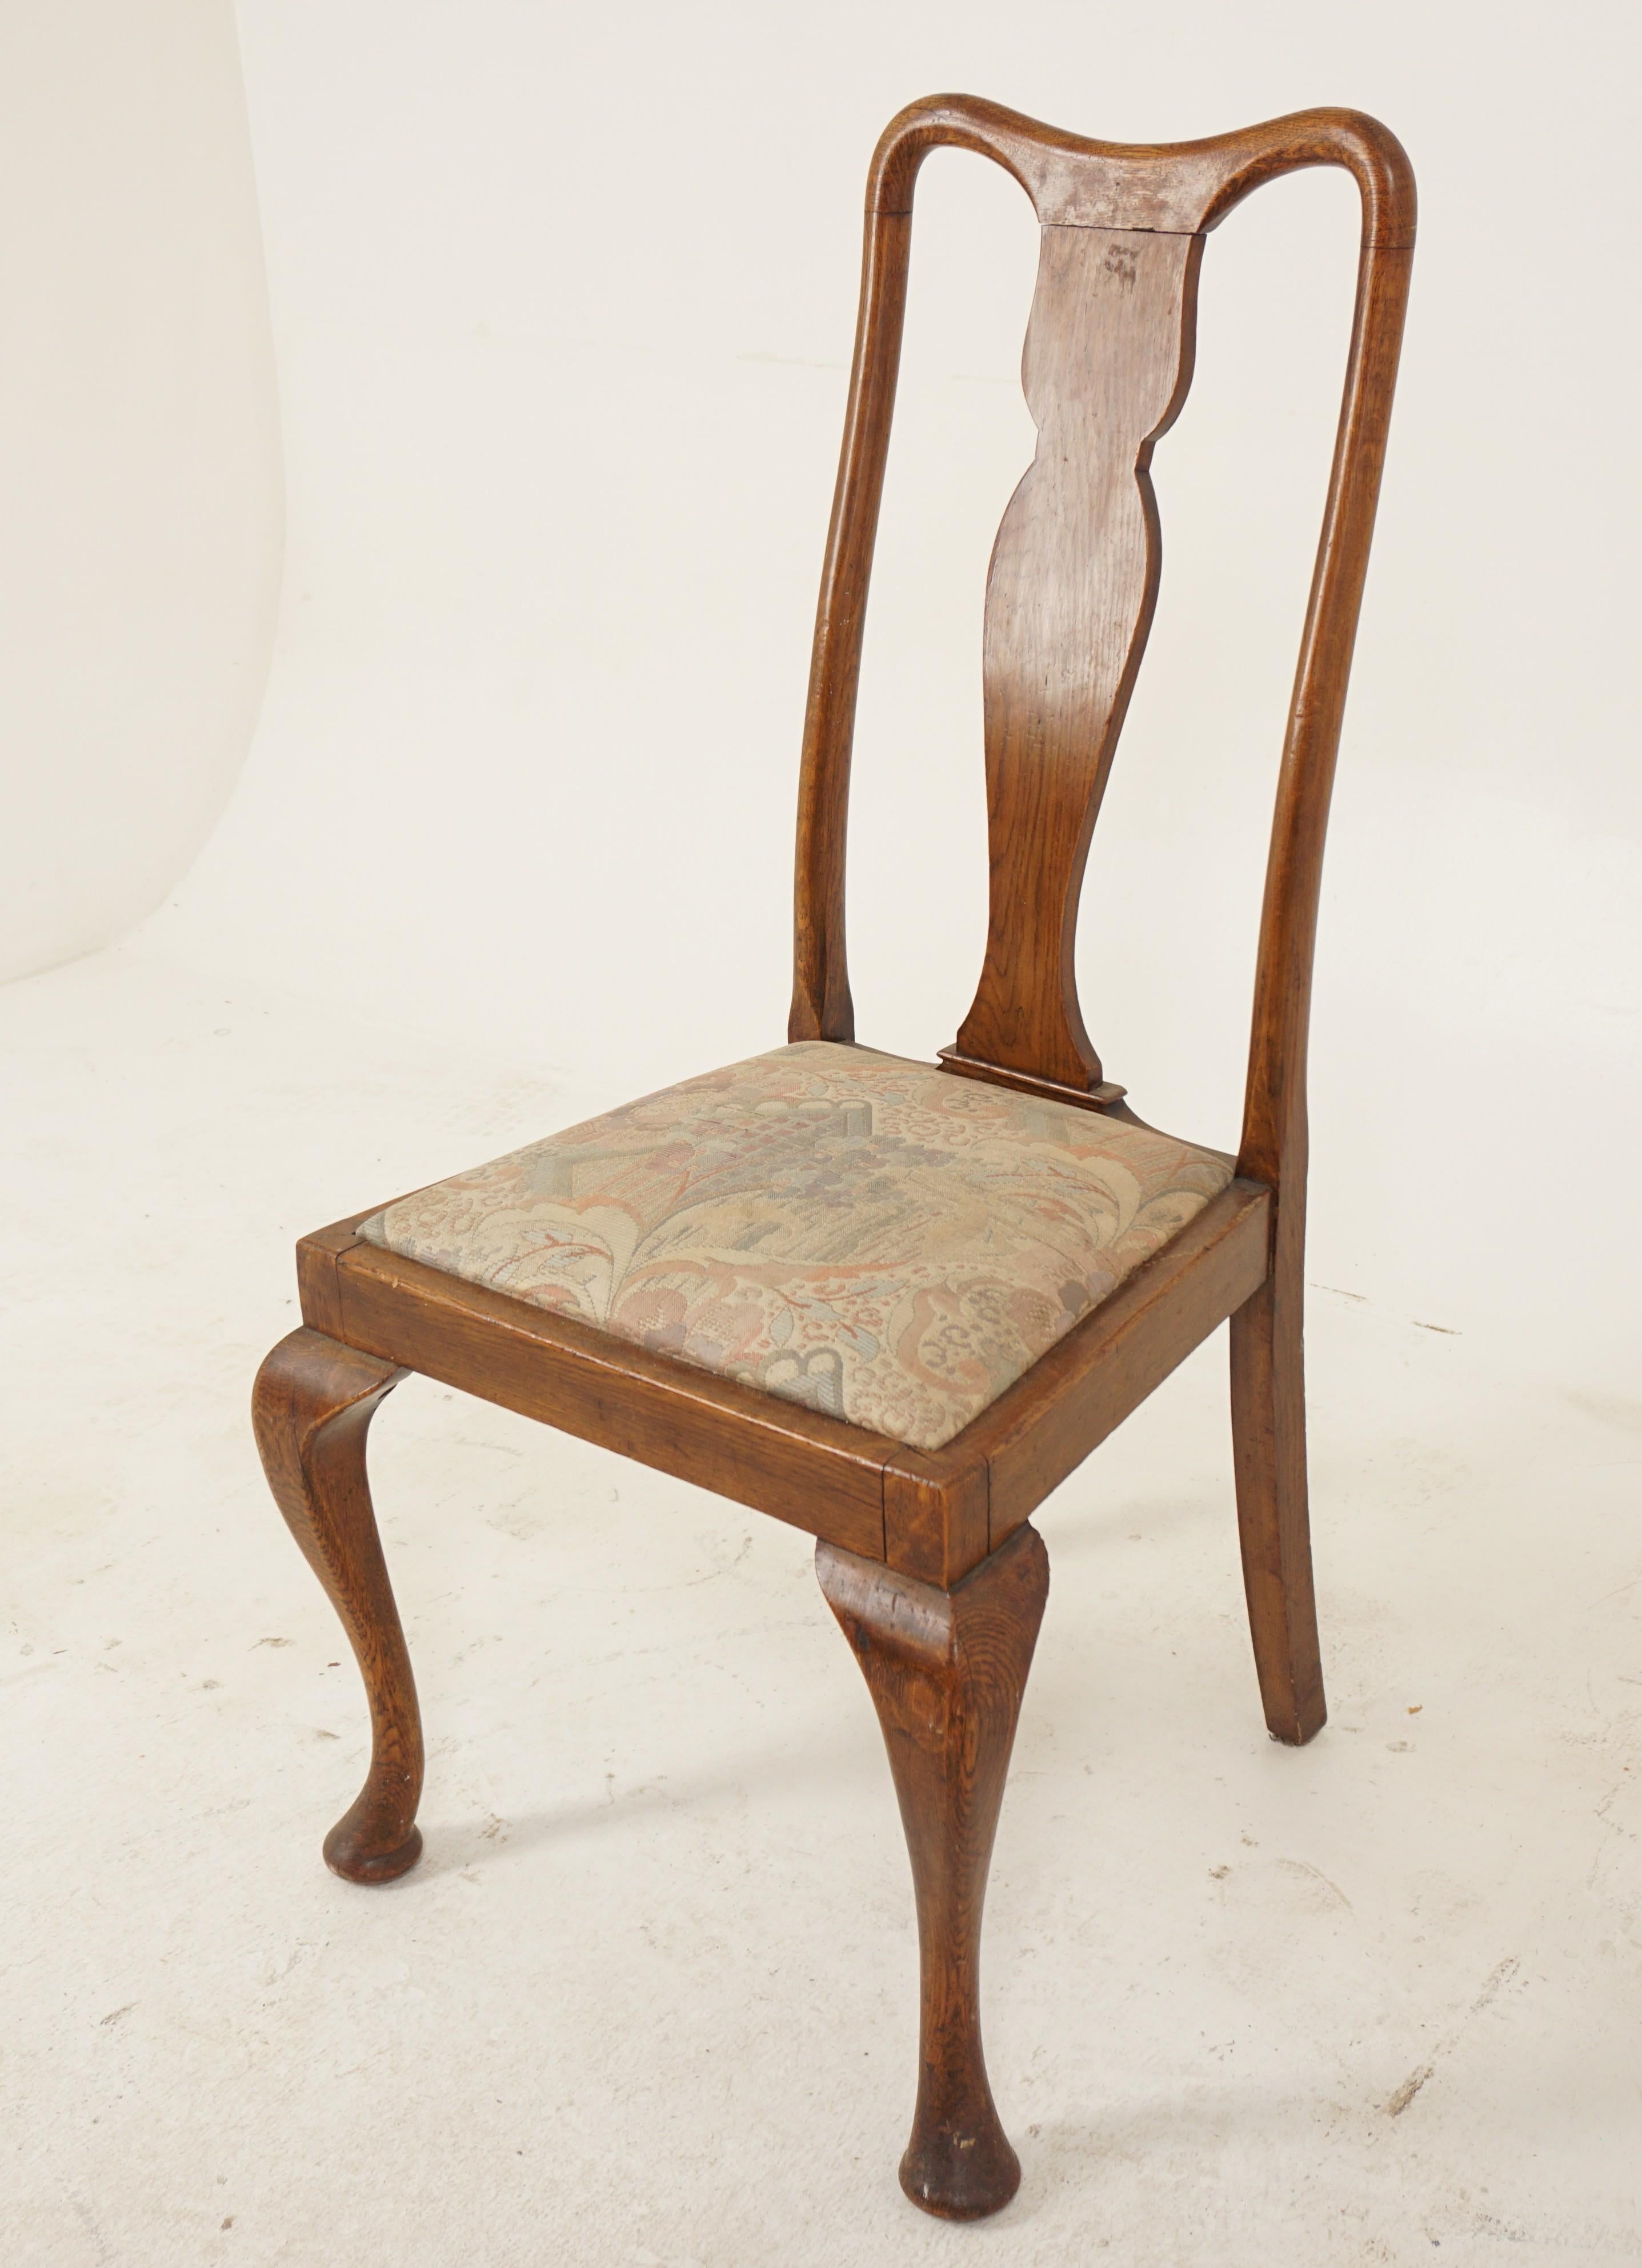 Single oak Queen Ann dining, occasional, desk chair, Scotland 1920, H599

Scotland 1920
Solid oak
Original finish
Having a shaped top rail
Over a centre splat
All standing on cabriole legs
With a drop in upholstered loose seat



H599
21